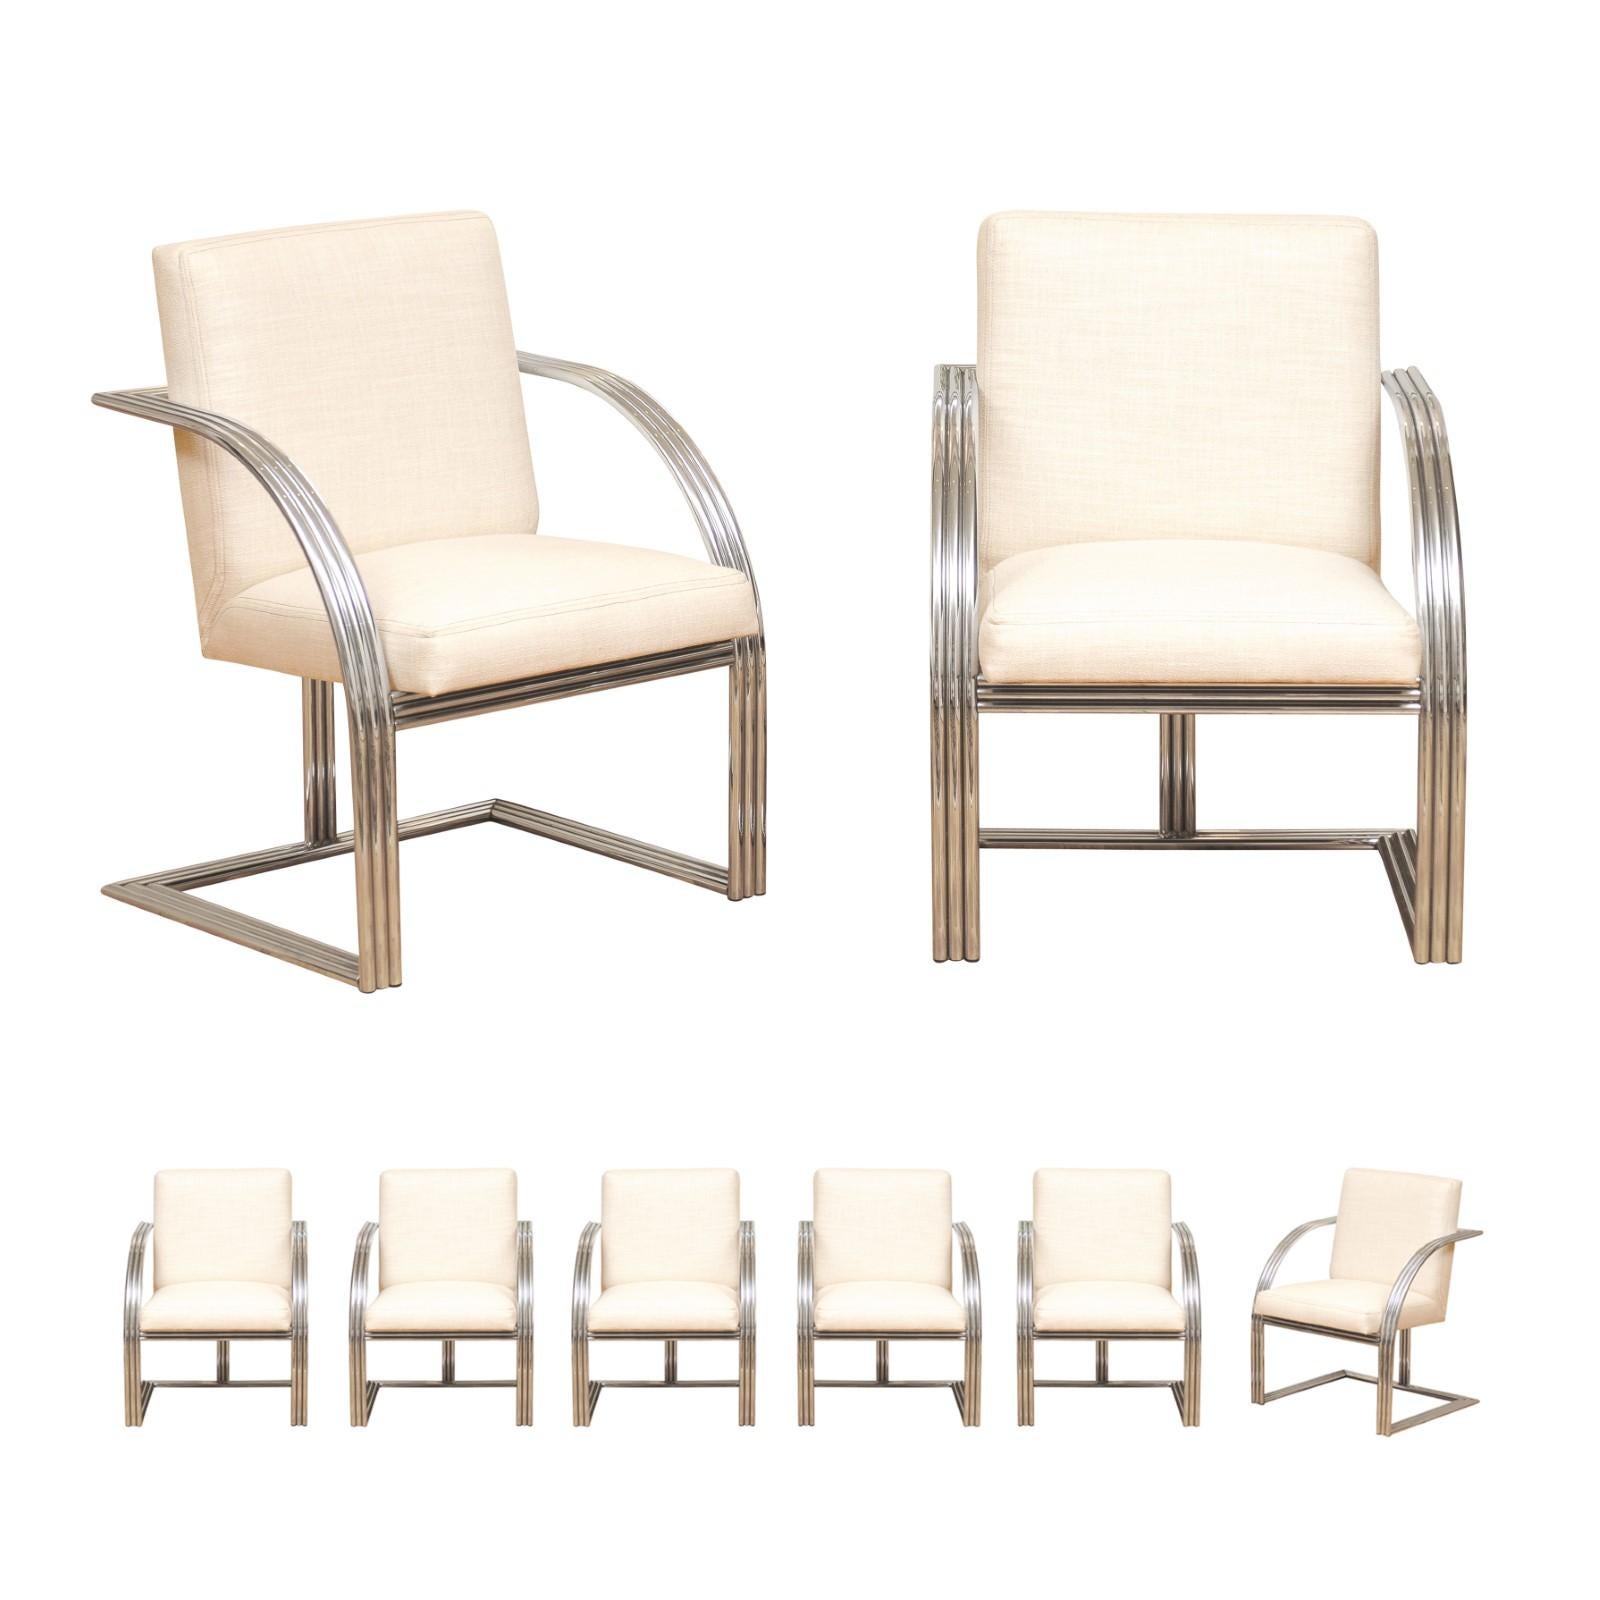 Exquisite Set of 8 Vintage Steel Art Deco Revival Dining Chairs by Milo Baughman For Sale 14